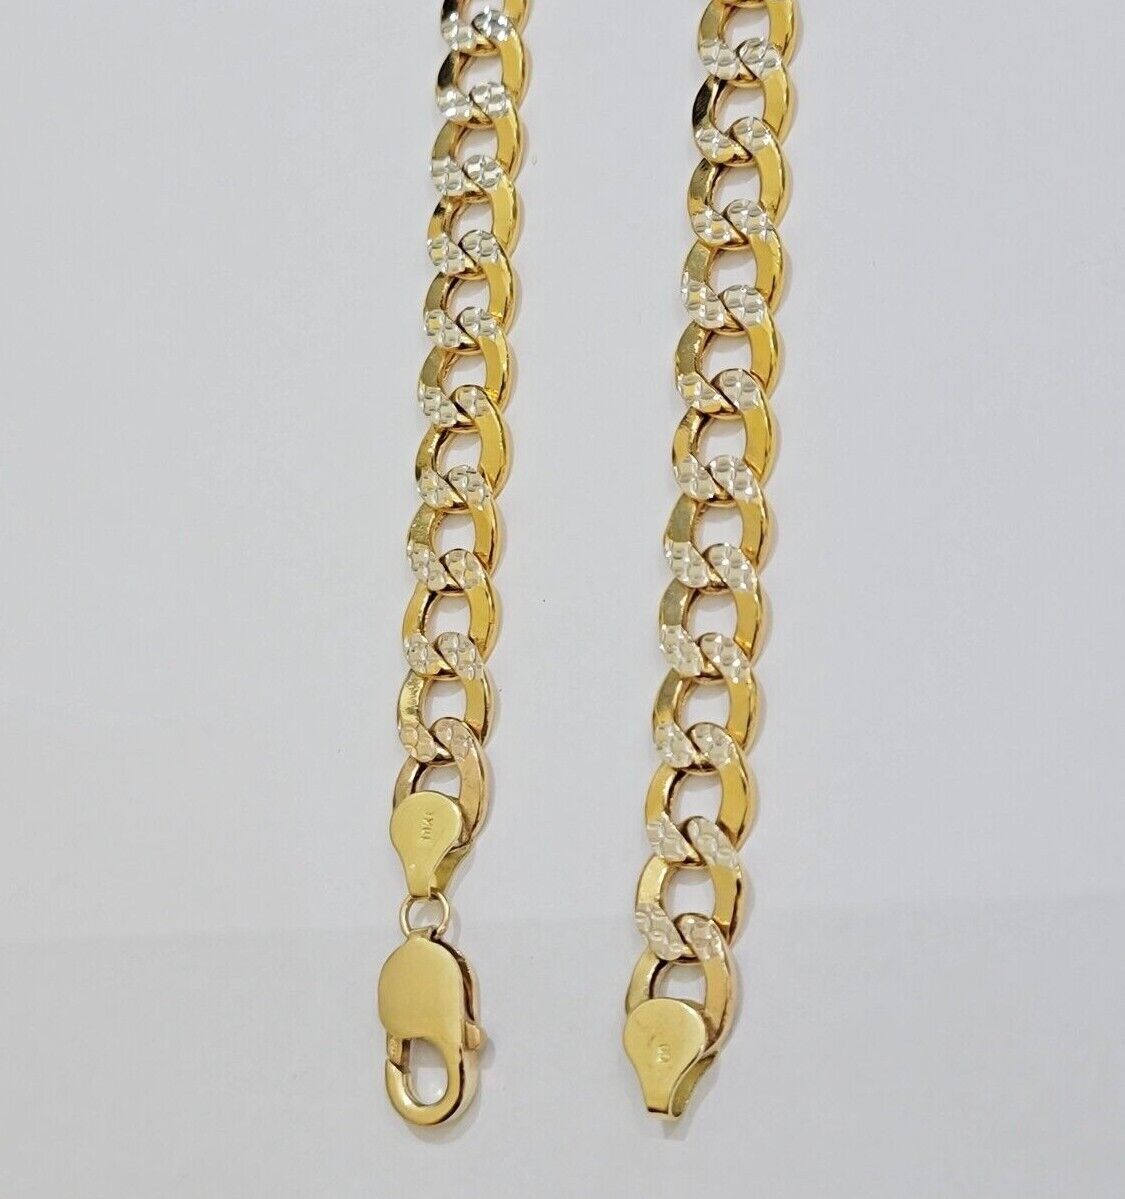 Real 10k Yellow Gold Chain Curb Link Necklace 10mm 18-30 Inch Diamond Cuts